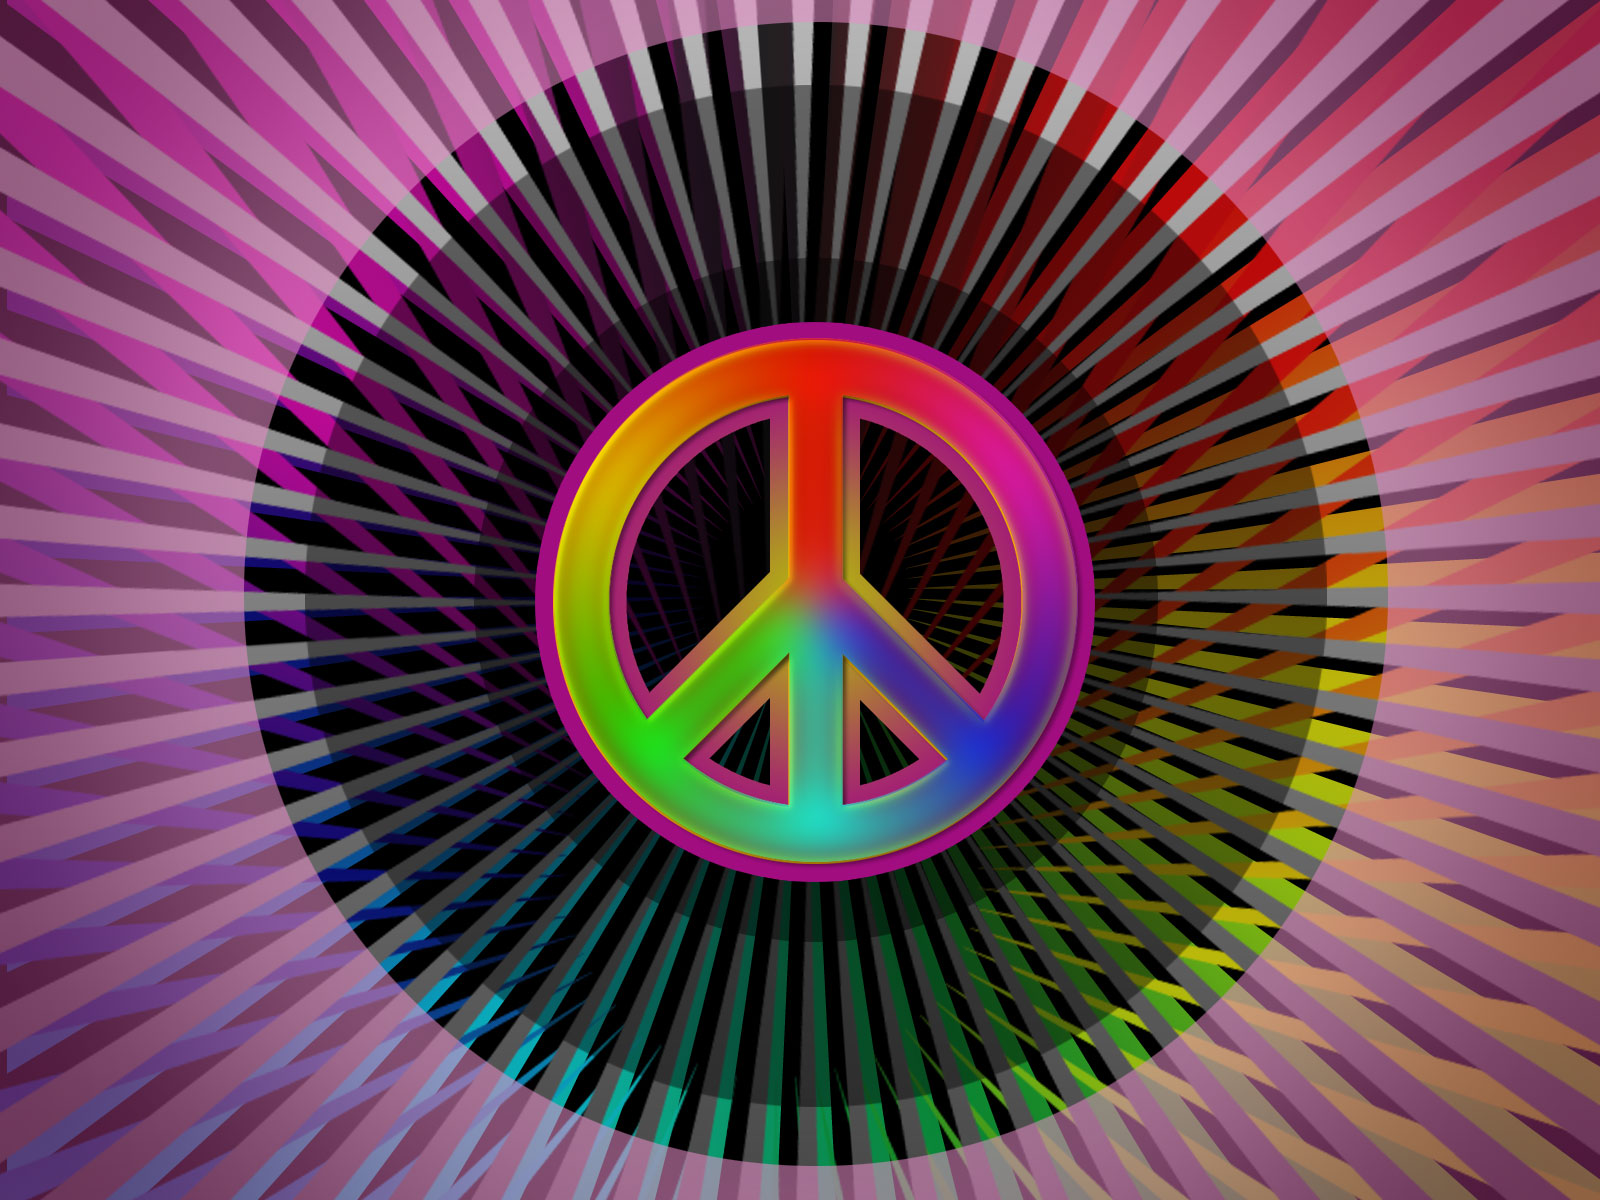 Colorful Peace Signs Wallpaper Full HDq